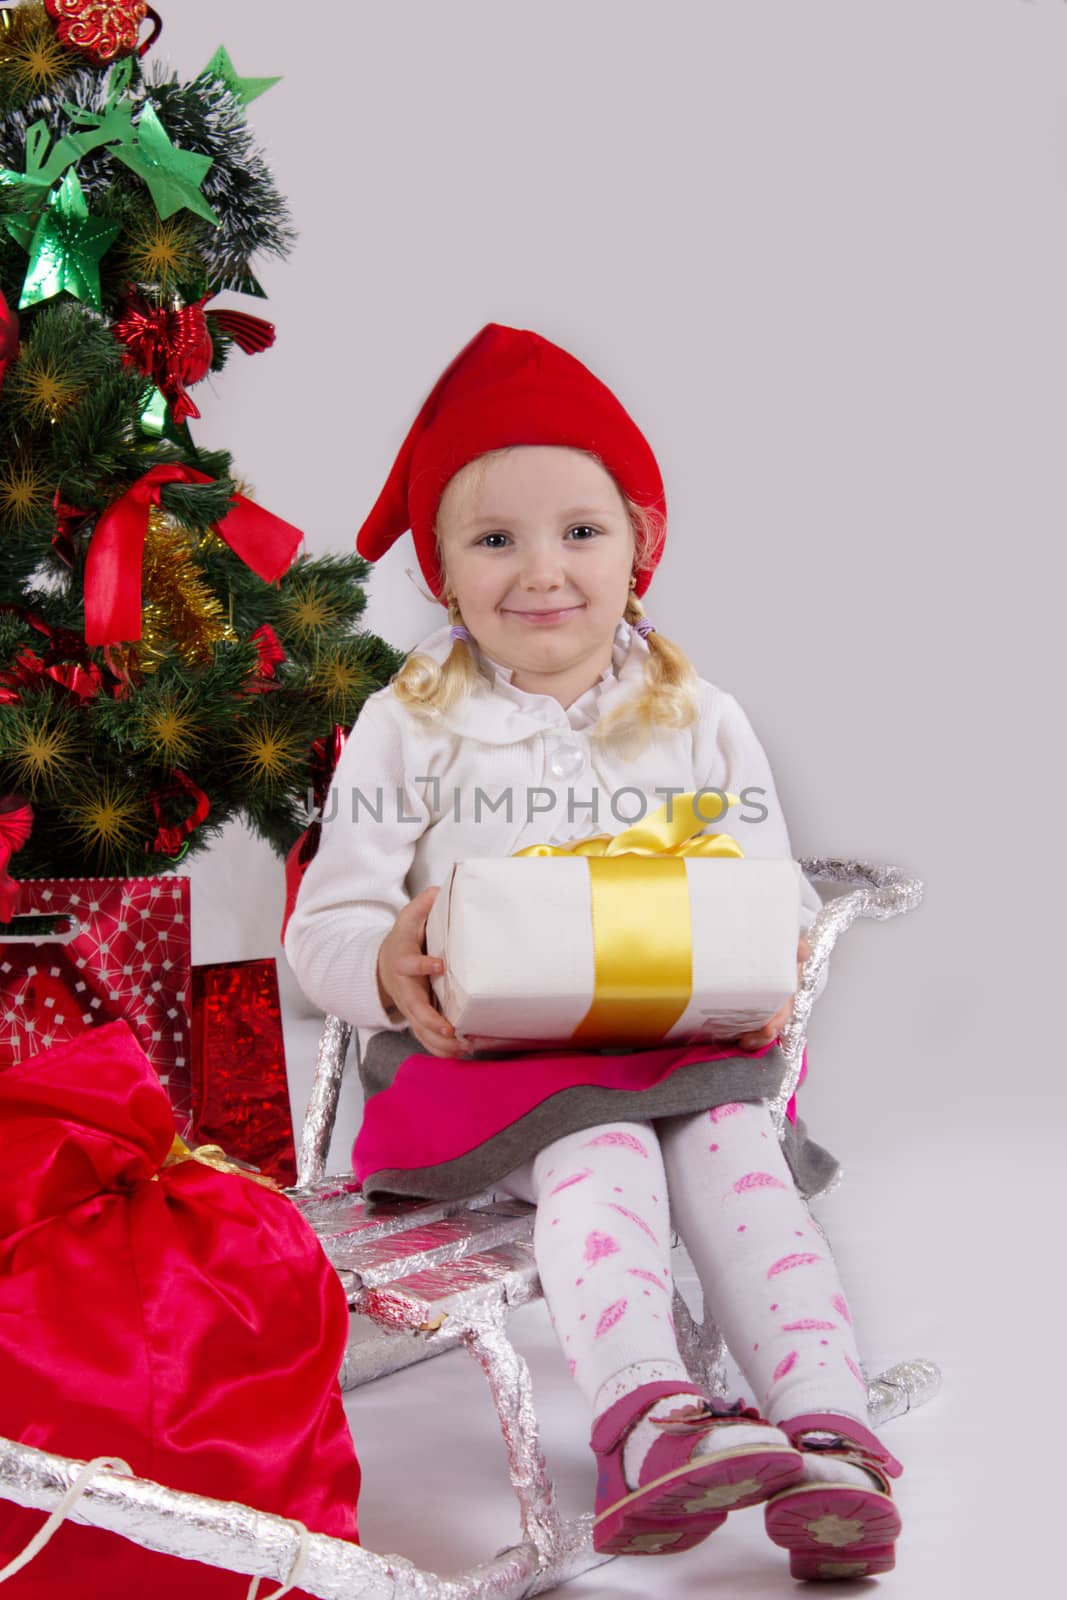 Little girl in Santa hat with present on sledge under Christmas tree